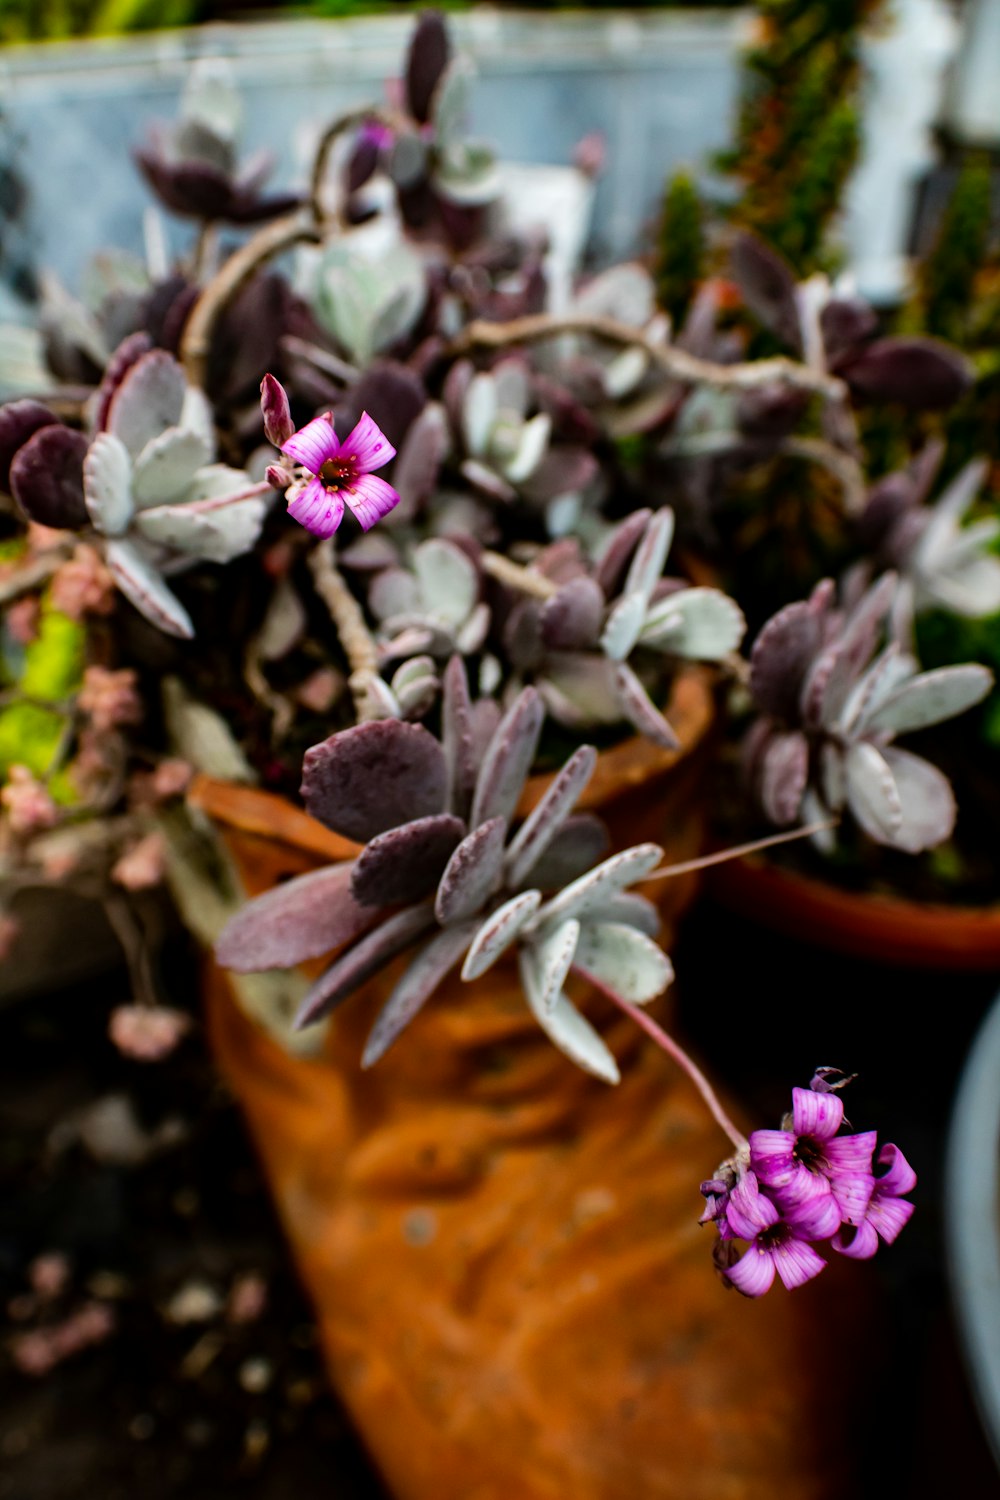 a close up of a potted plant with purple flowers